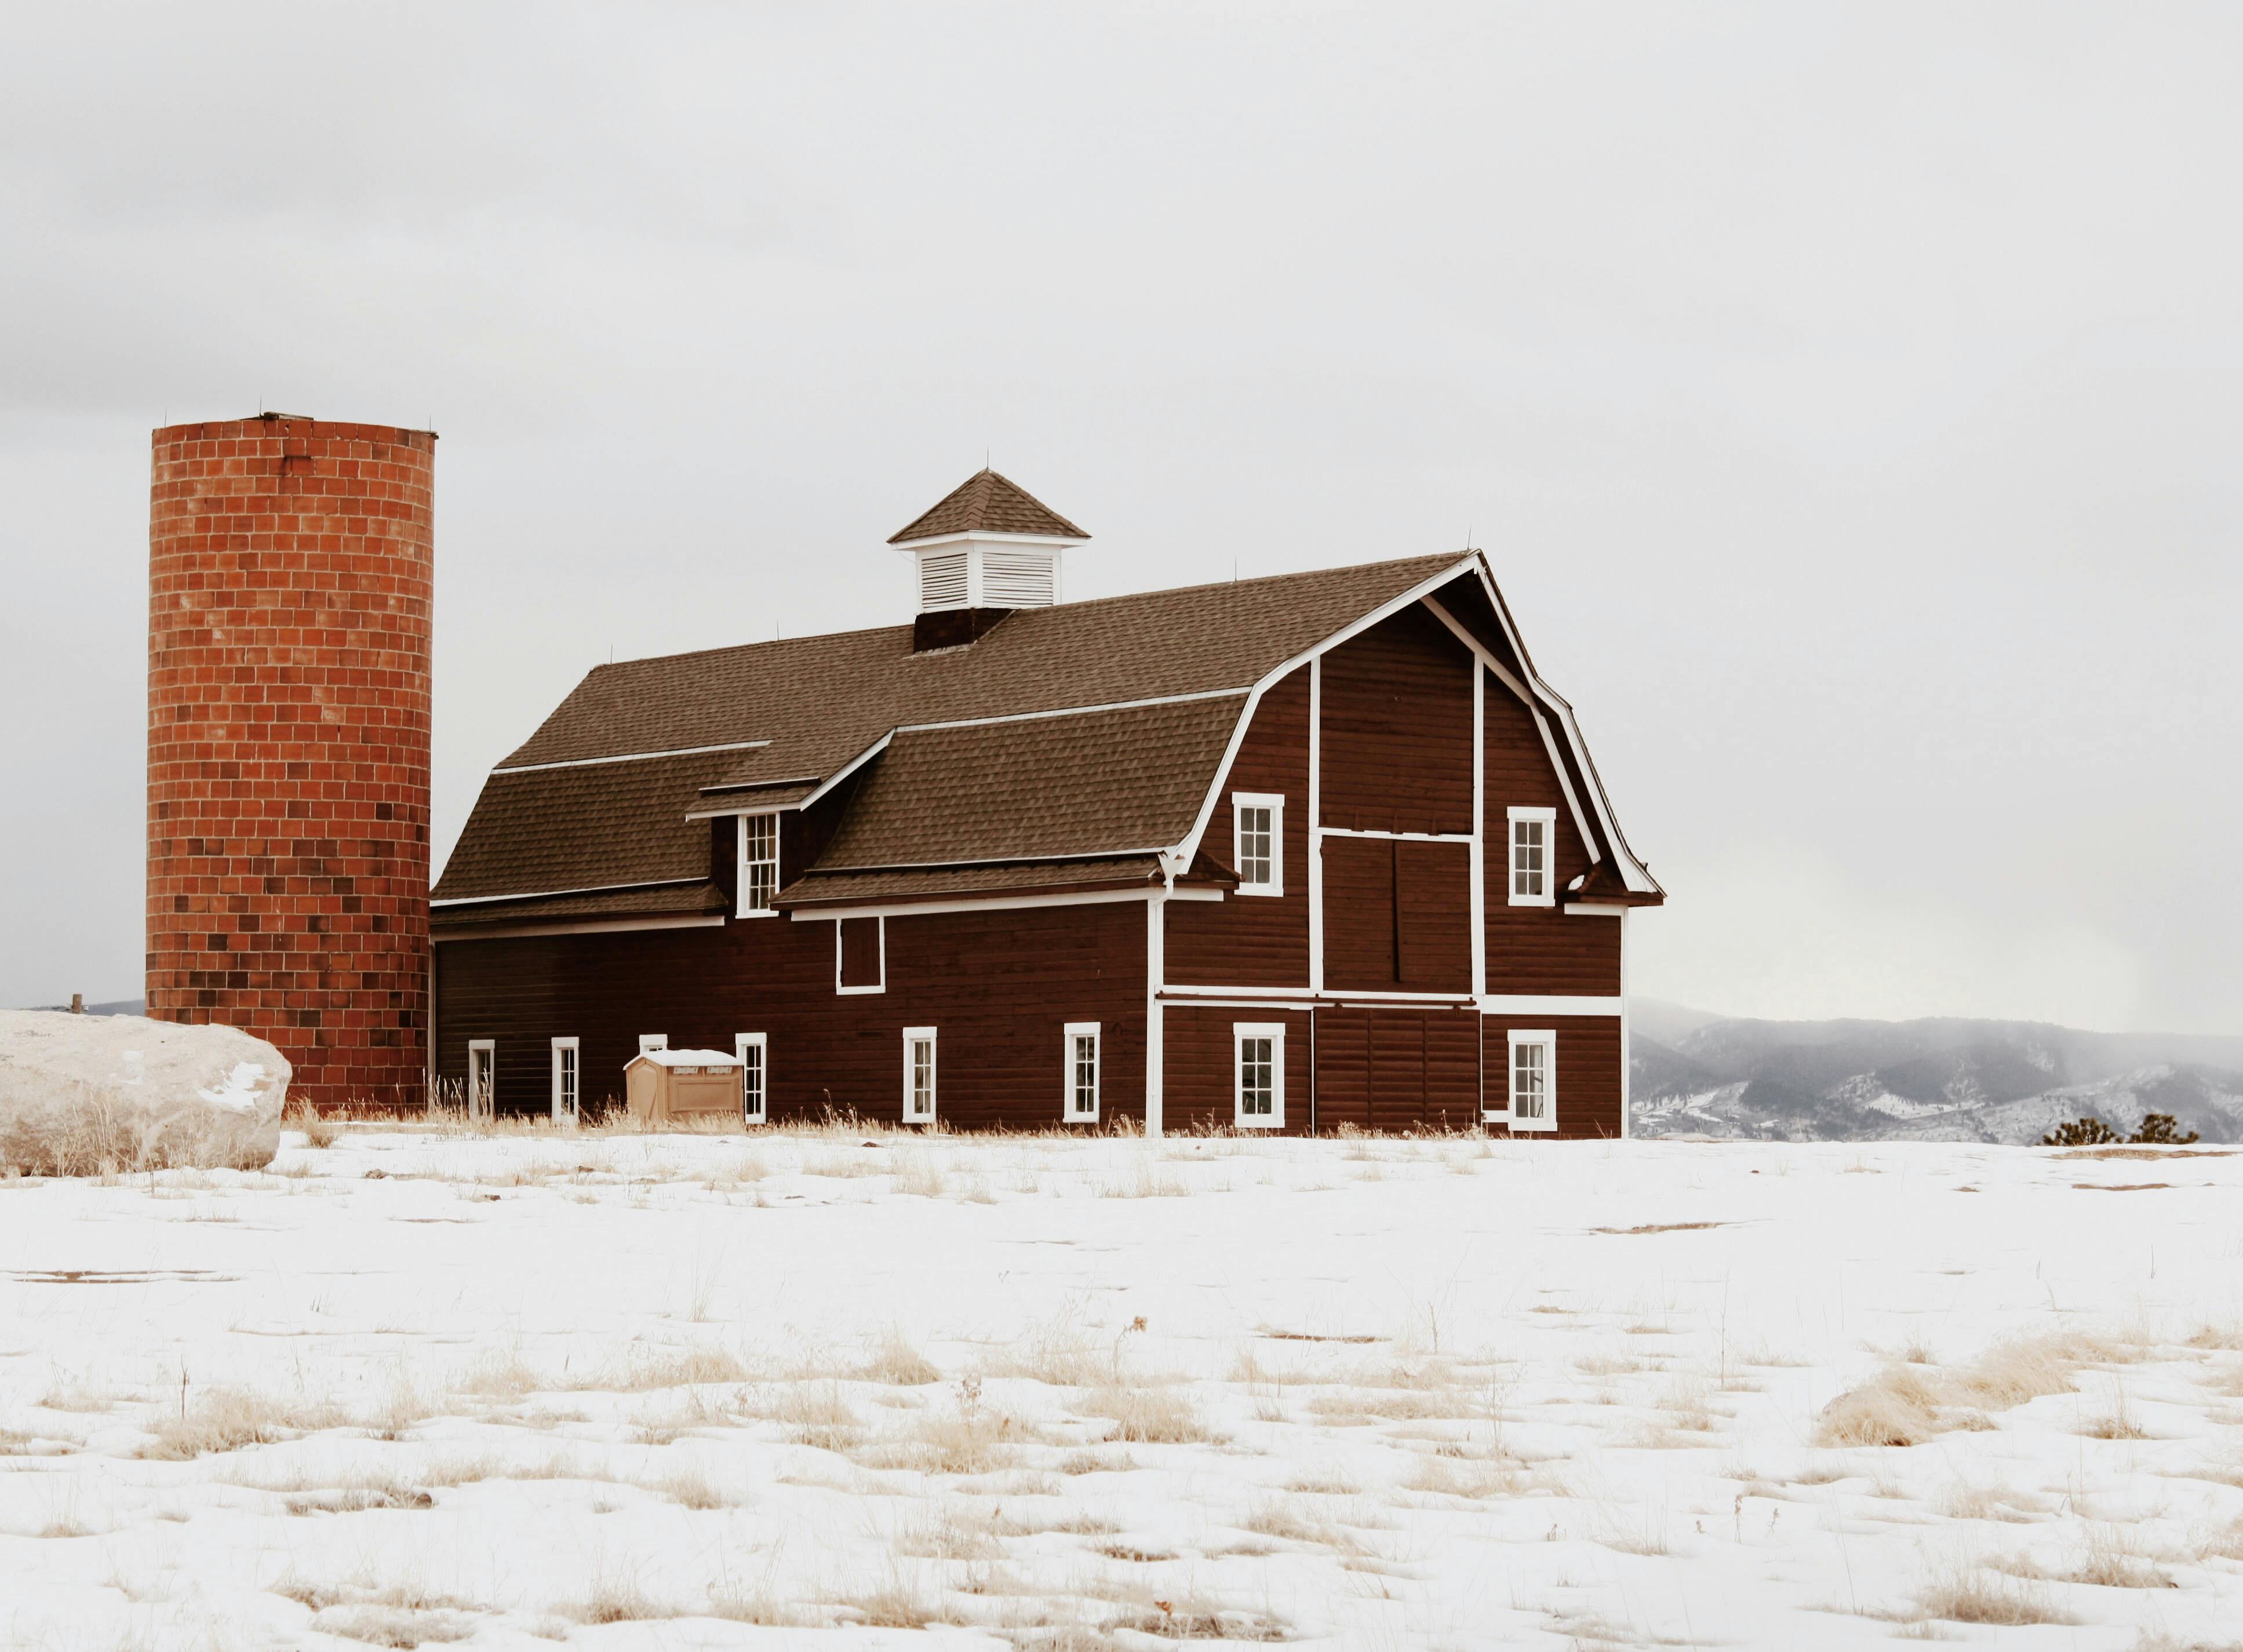 brown wooden barn and silo with brick wall on snow covered ground